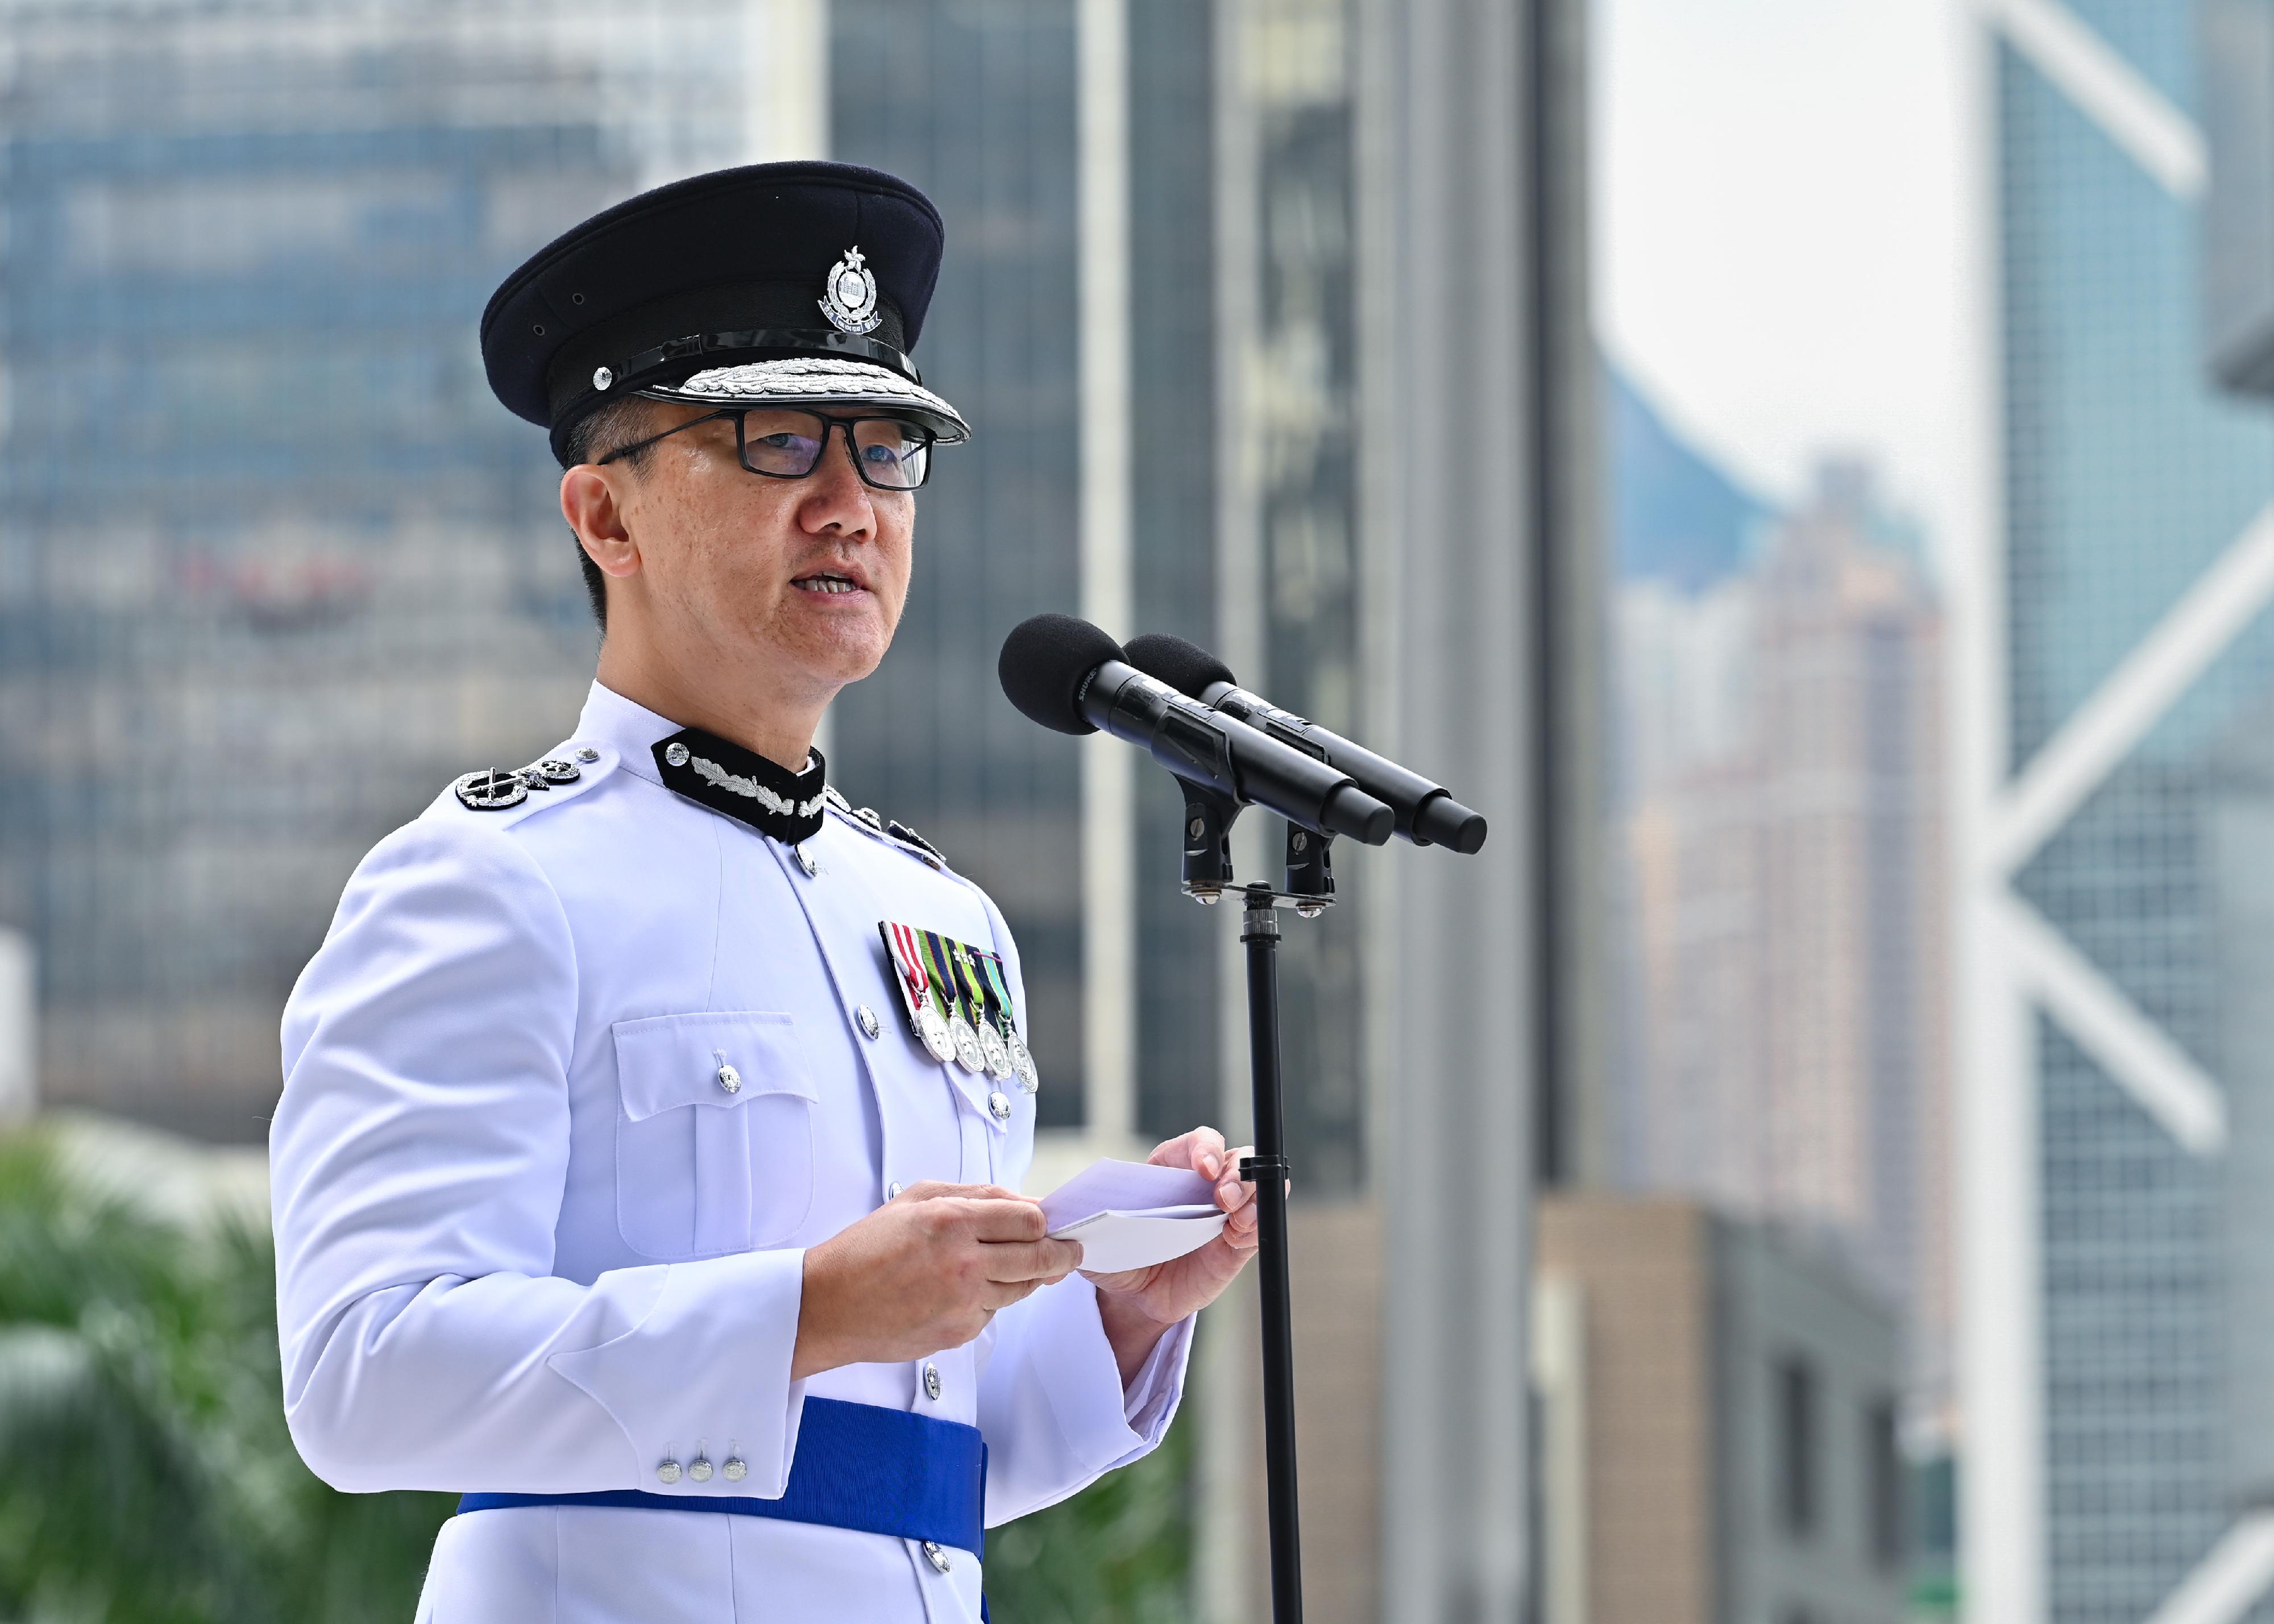 The Hong Kong Police Force holds a ceremony at the Police Headquarters this morning (November 10) to pay tribute to members of the Hong Kong Police Force and Hong Kong Auxiliary Police Force who have given their lives in the line of duty. Photo shows the Commissioner of Police, Mr Siu Chak-yee, giving a speech at the ceremony.